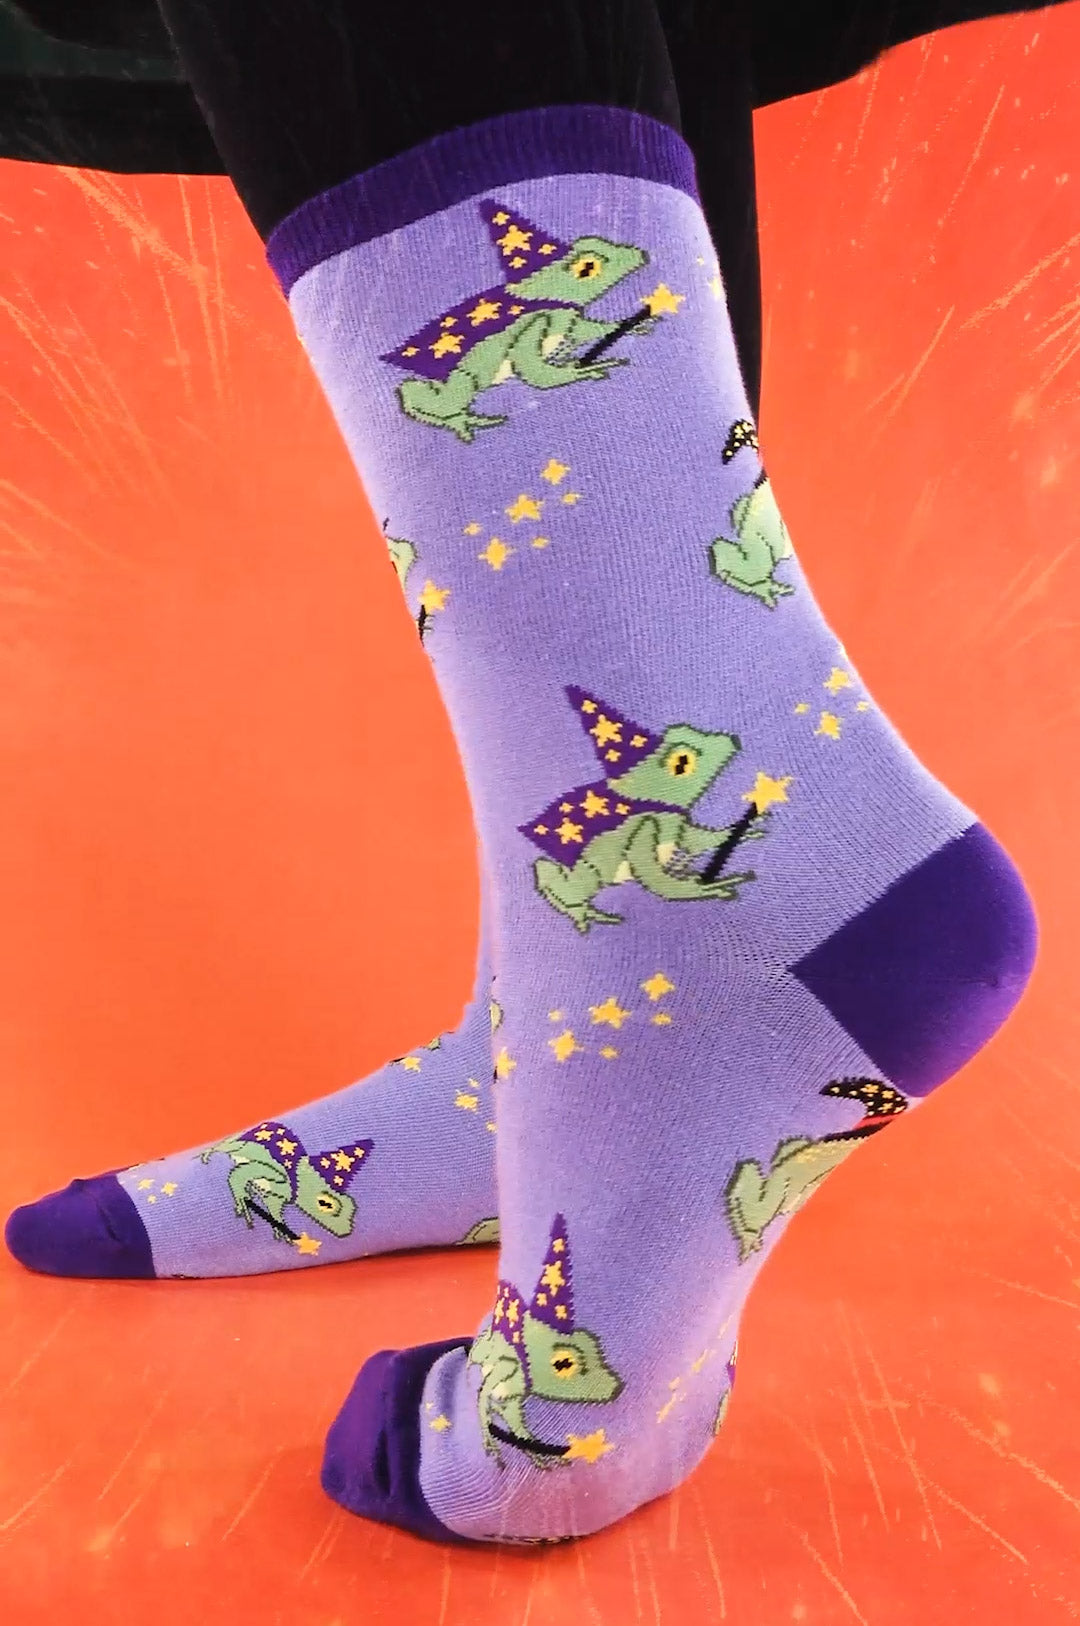 Frog socks with magician and wizard frogs on a purple background